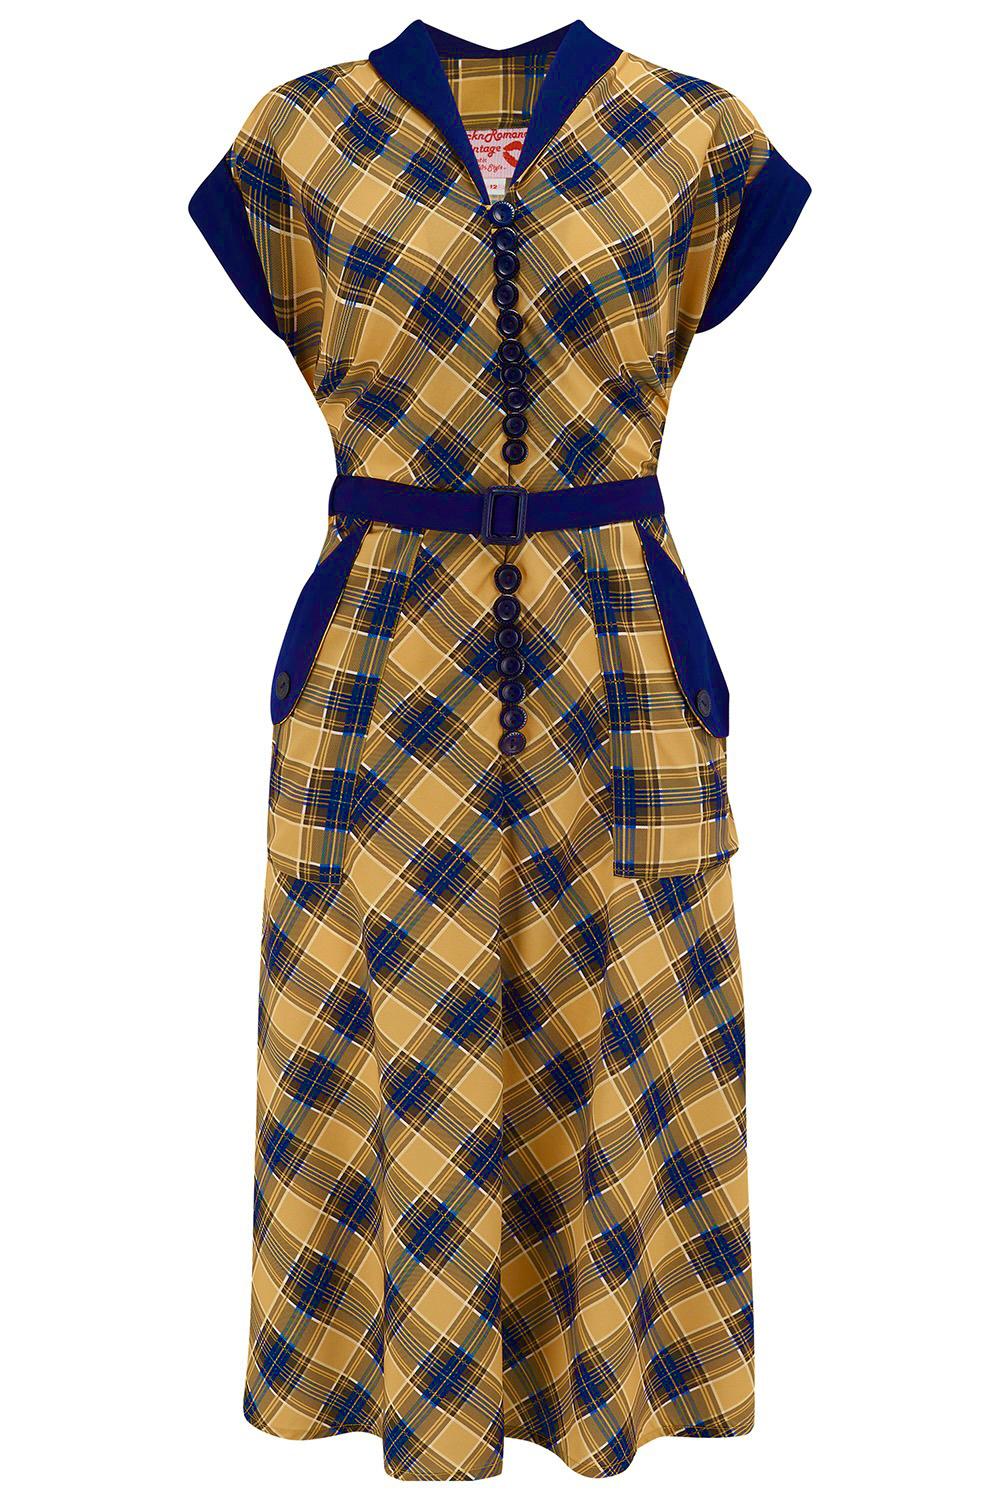 The "Casey" Dress in Mustard & Navy Check Print, True 1950s Vintage Style - True and authentic vintage style clothing, inspired by the Classic styles of CC41 , WW2 and the fun 1950s RocknRoll era, for everyday wear plus events like Goodwood Revival, Twinwood Festival and Viva Las Vegas Rockabilly Weekend Rock n Romance Rock n Romance